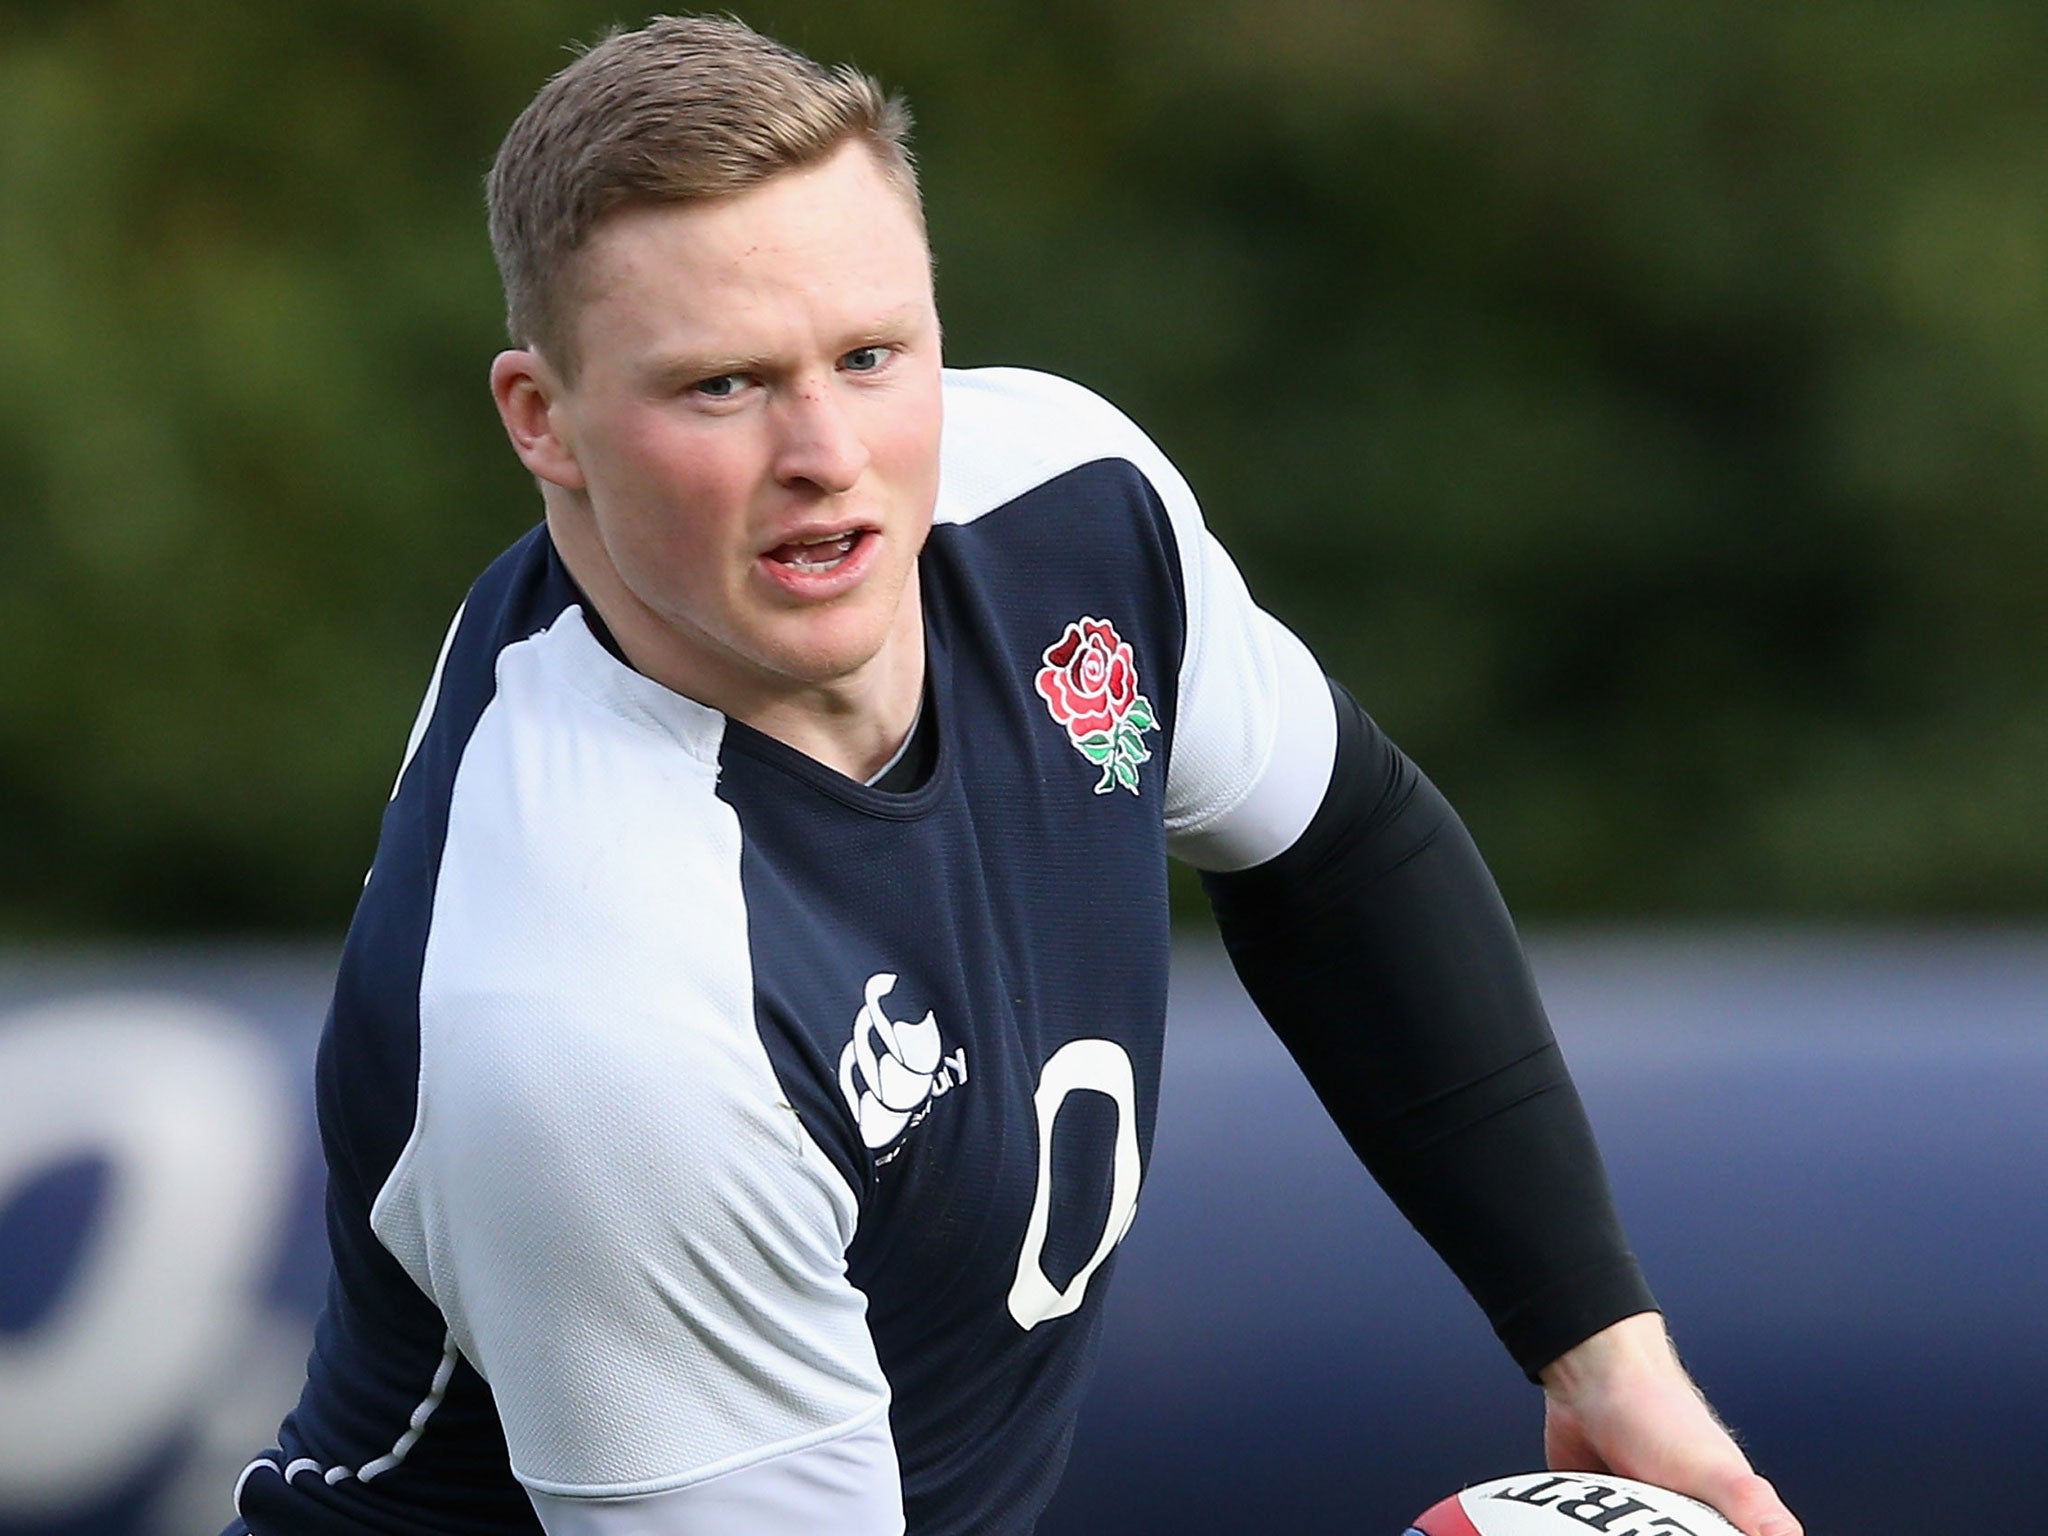 Chris Ashton: Was heard to say that he ‘does not even know what condescending means!’